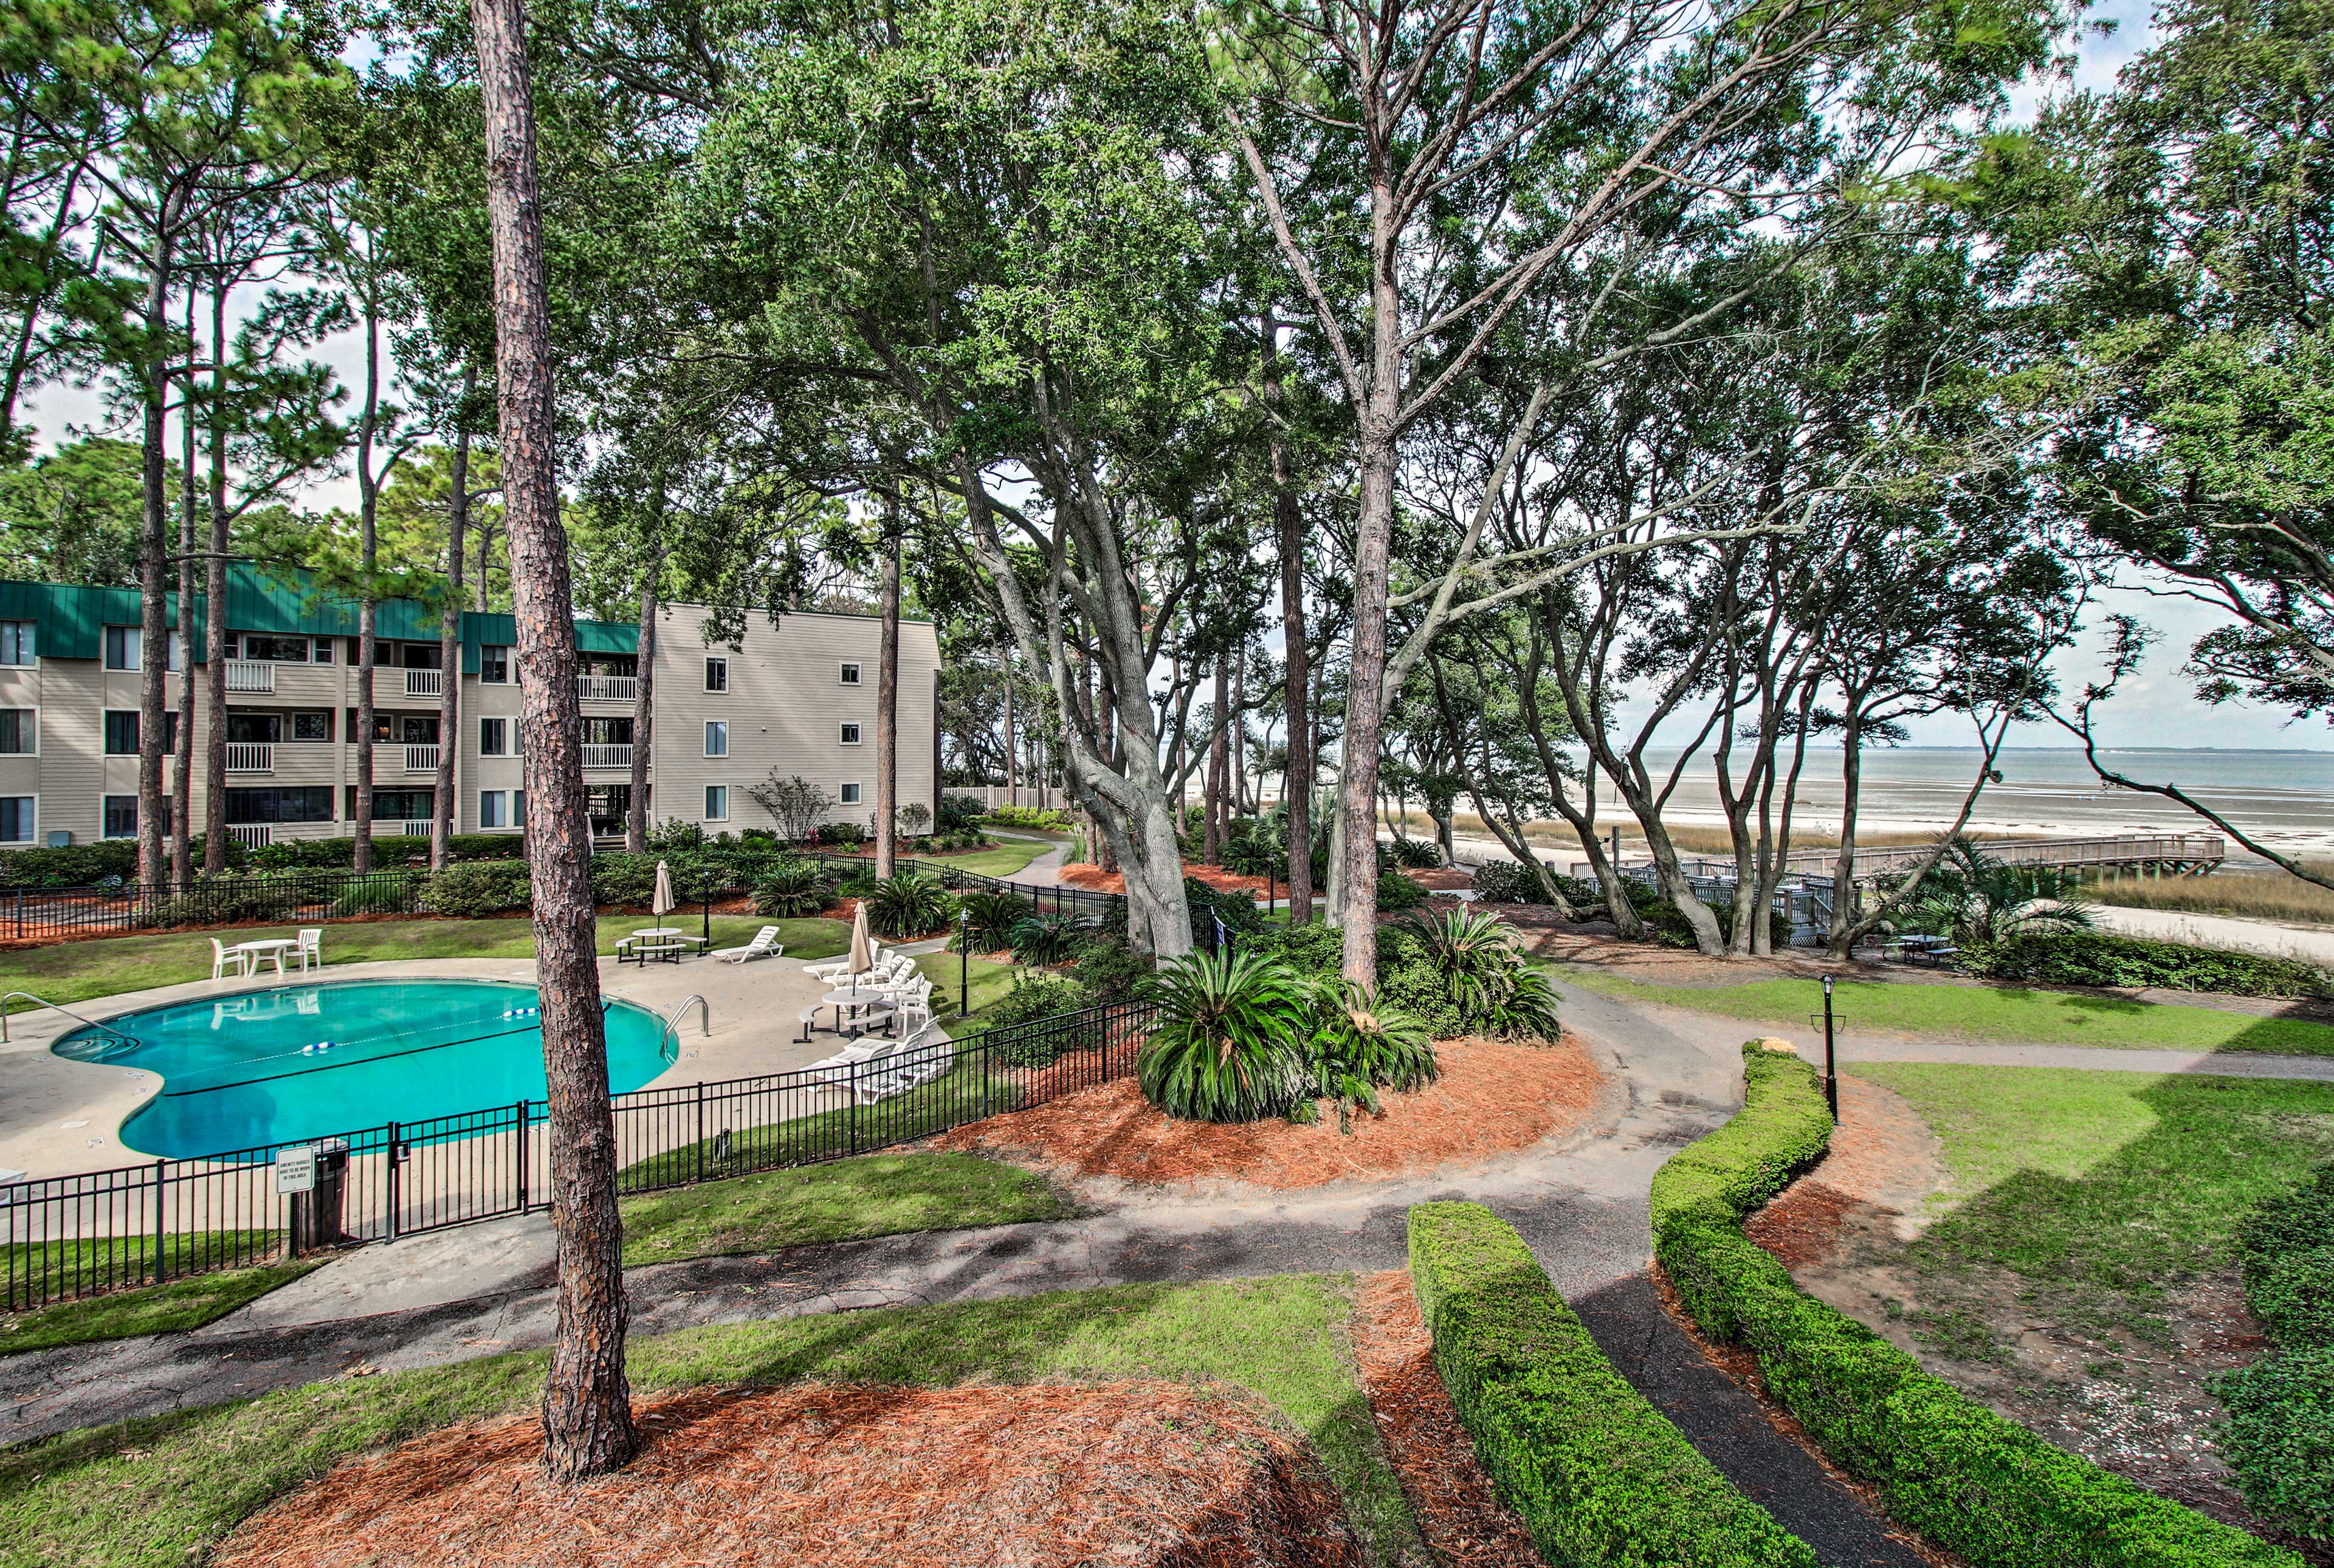 Hilton Head Island Vacation Rental | 2BR | 2BA | Stairs Required | 1,035 Sq Ft